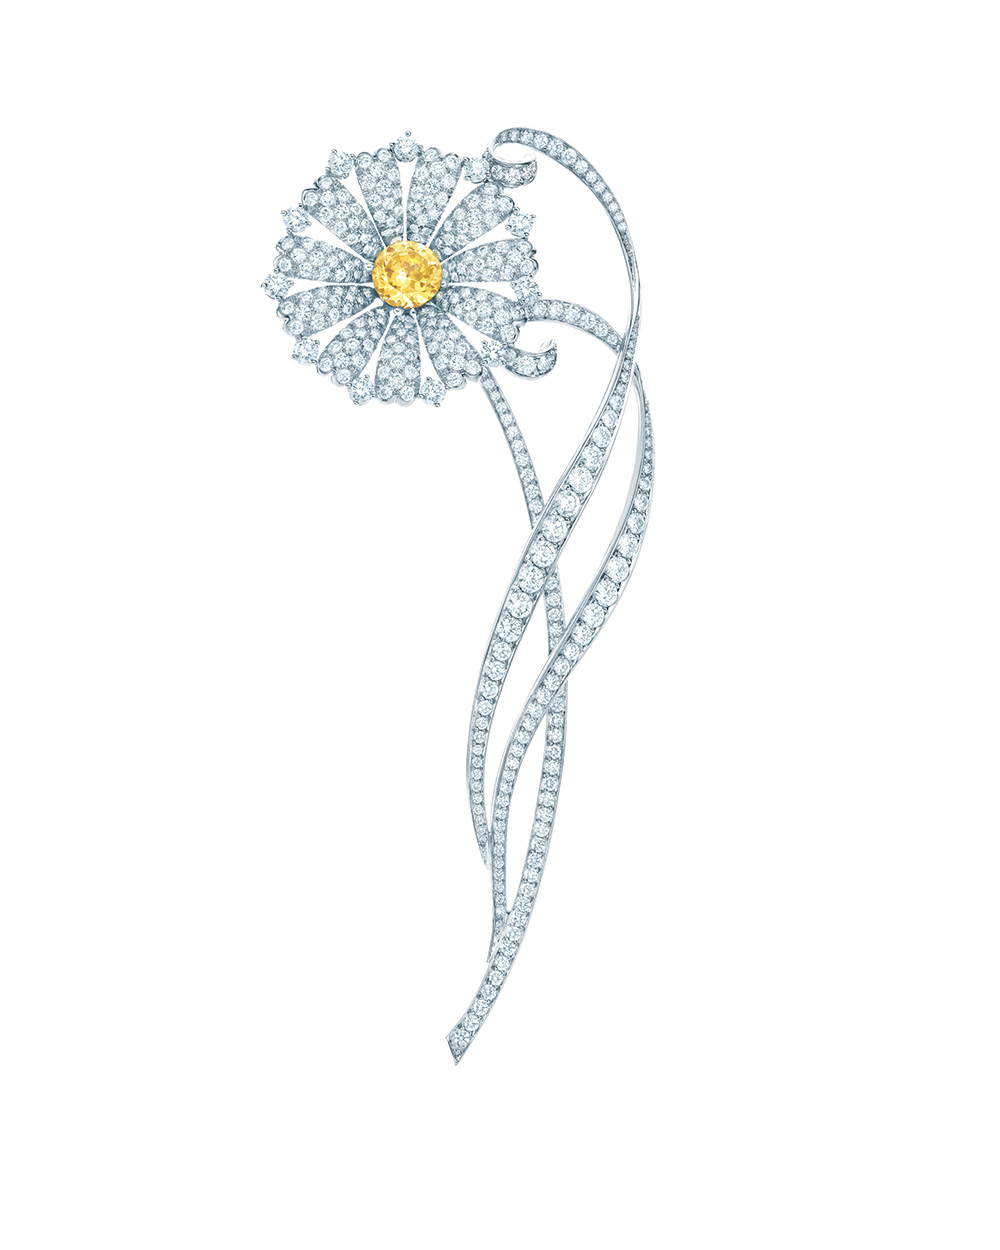 Great Gatsby Collection Yellow Diamond Daisy Brooch from Tiffany & Co